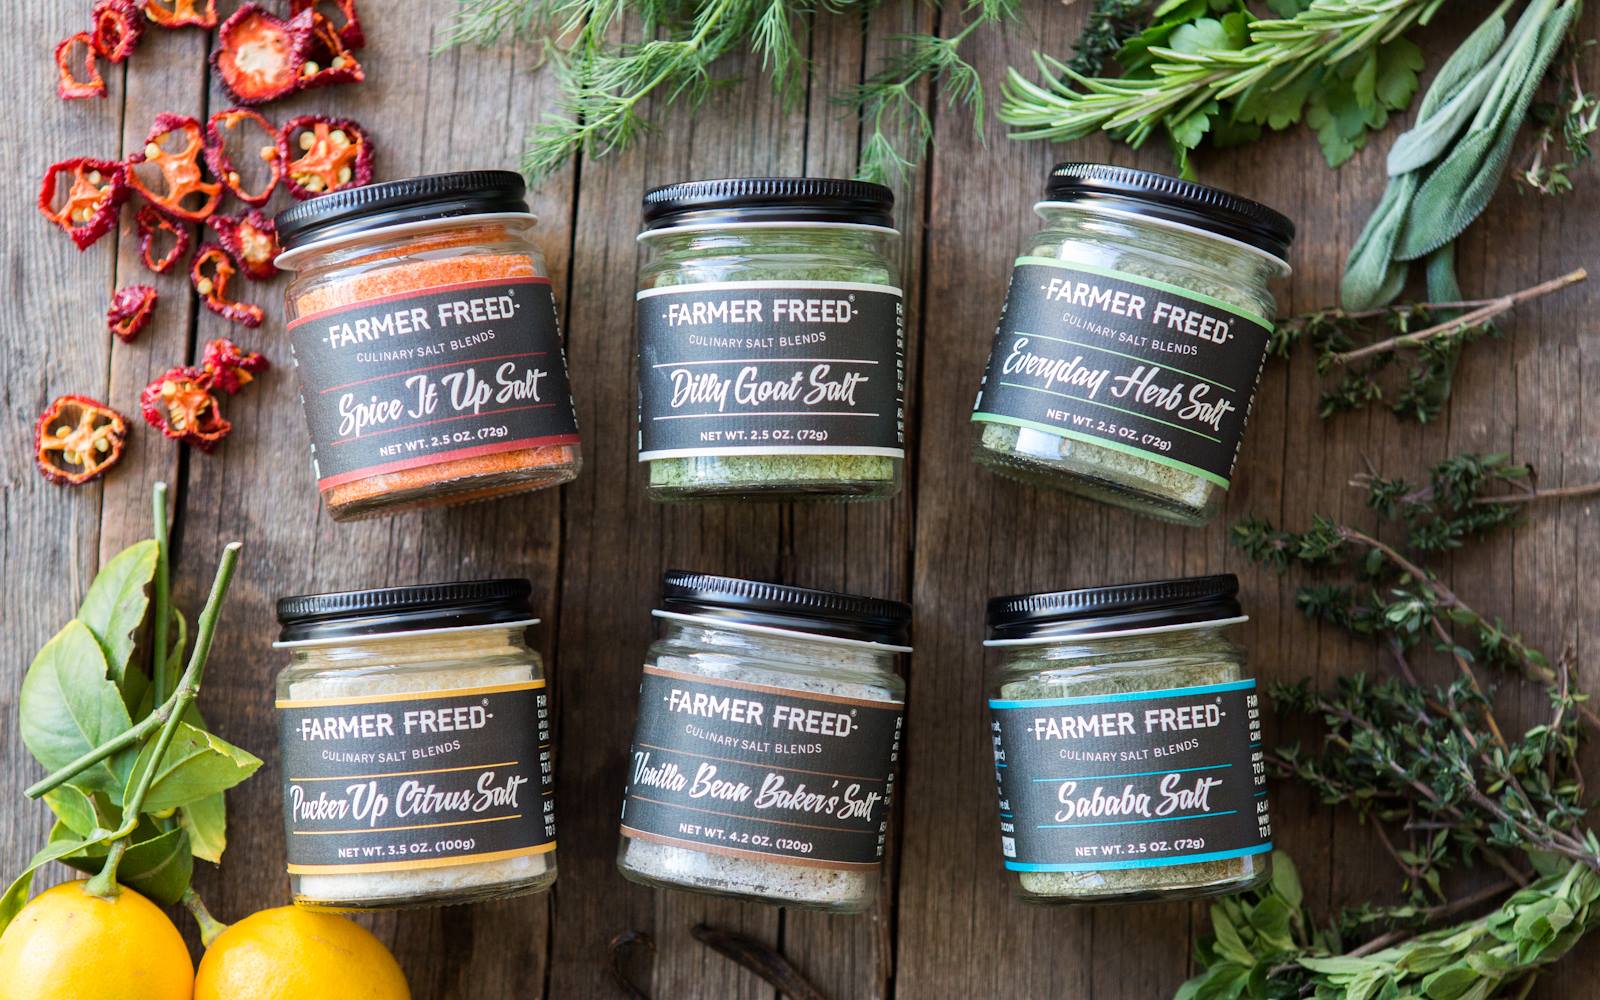 Farmer Freed culinary salt blends come in six varieties 